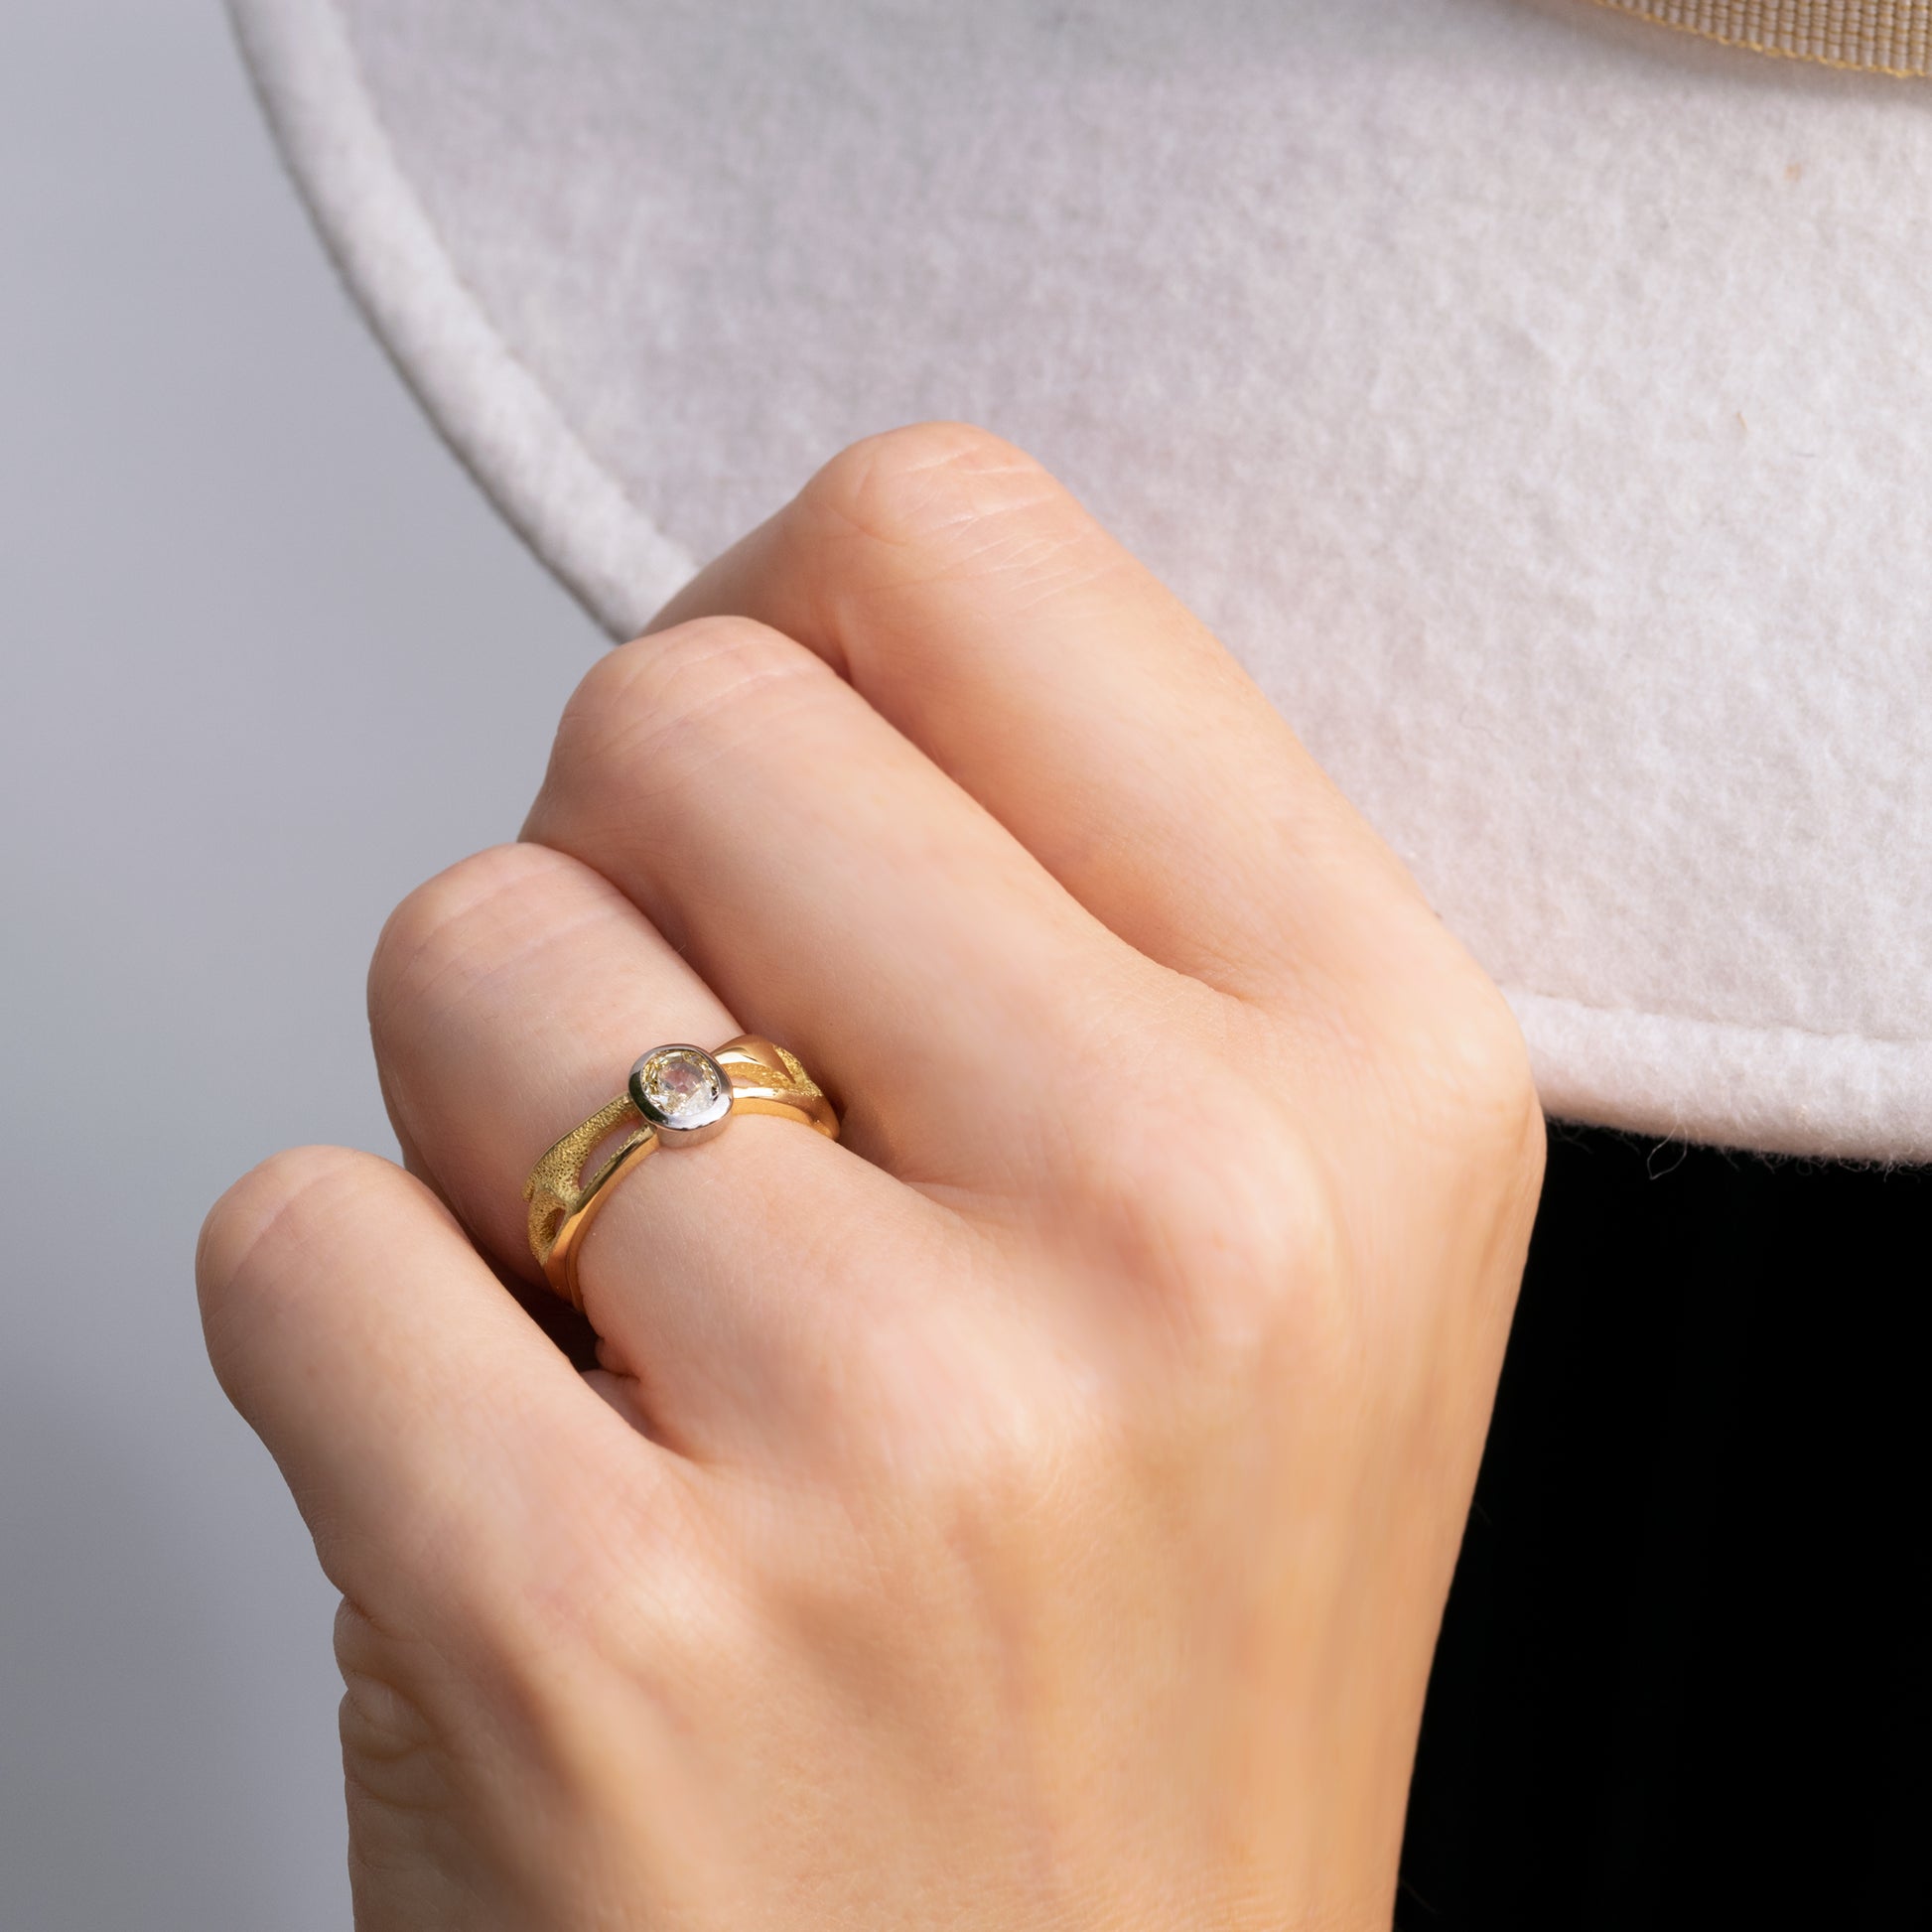 Orme-Brown Contemporary Fine Jewellery Ethical engagement ring in sustainable recycled 18ct yellow and white gold featuring a yellow old cut diamond